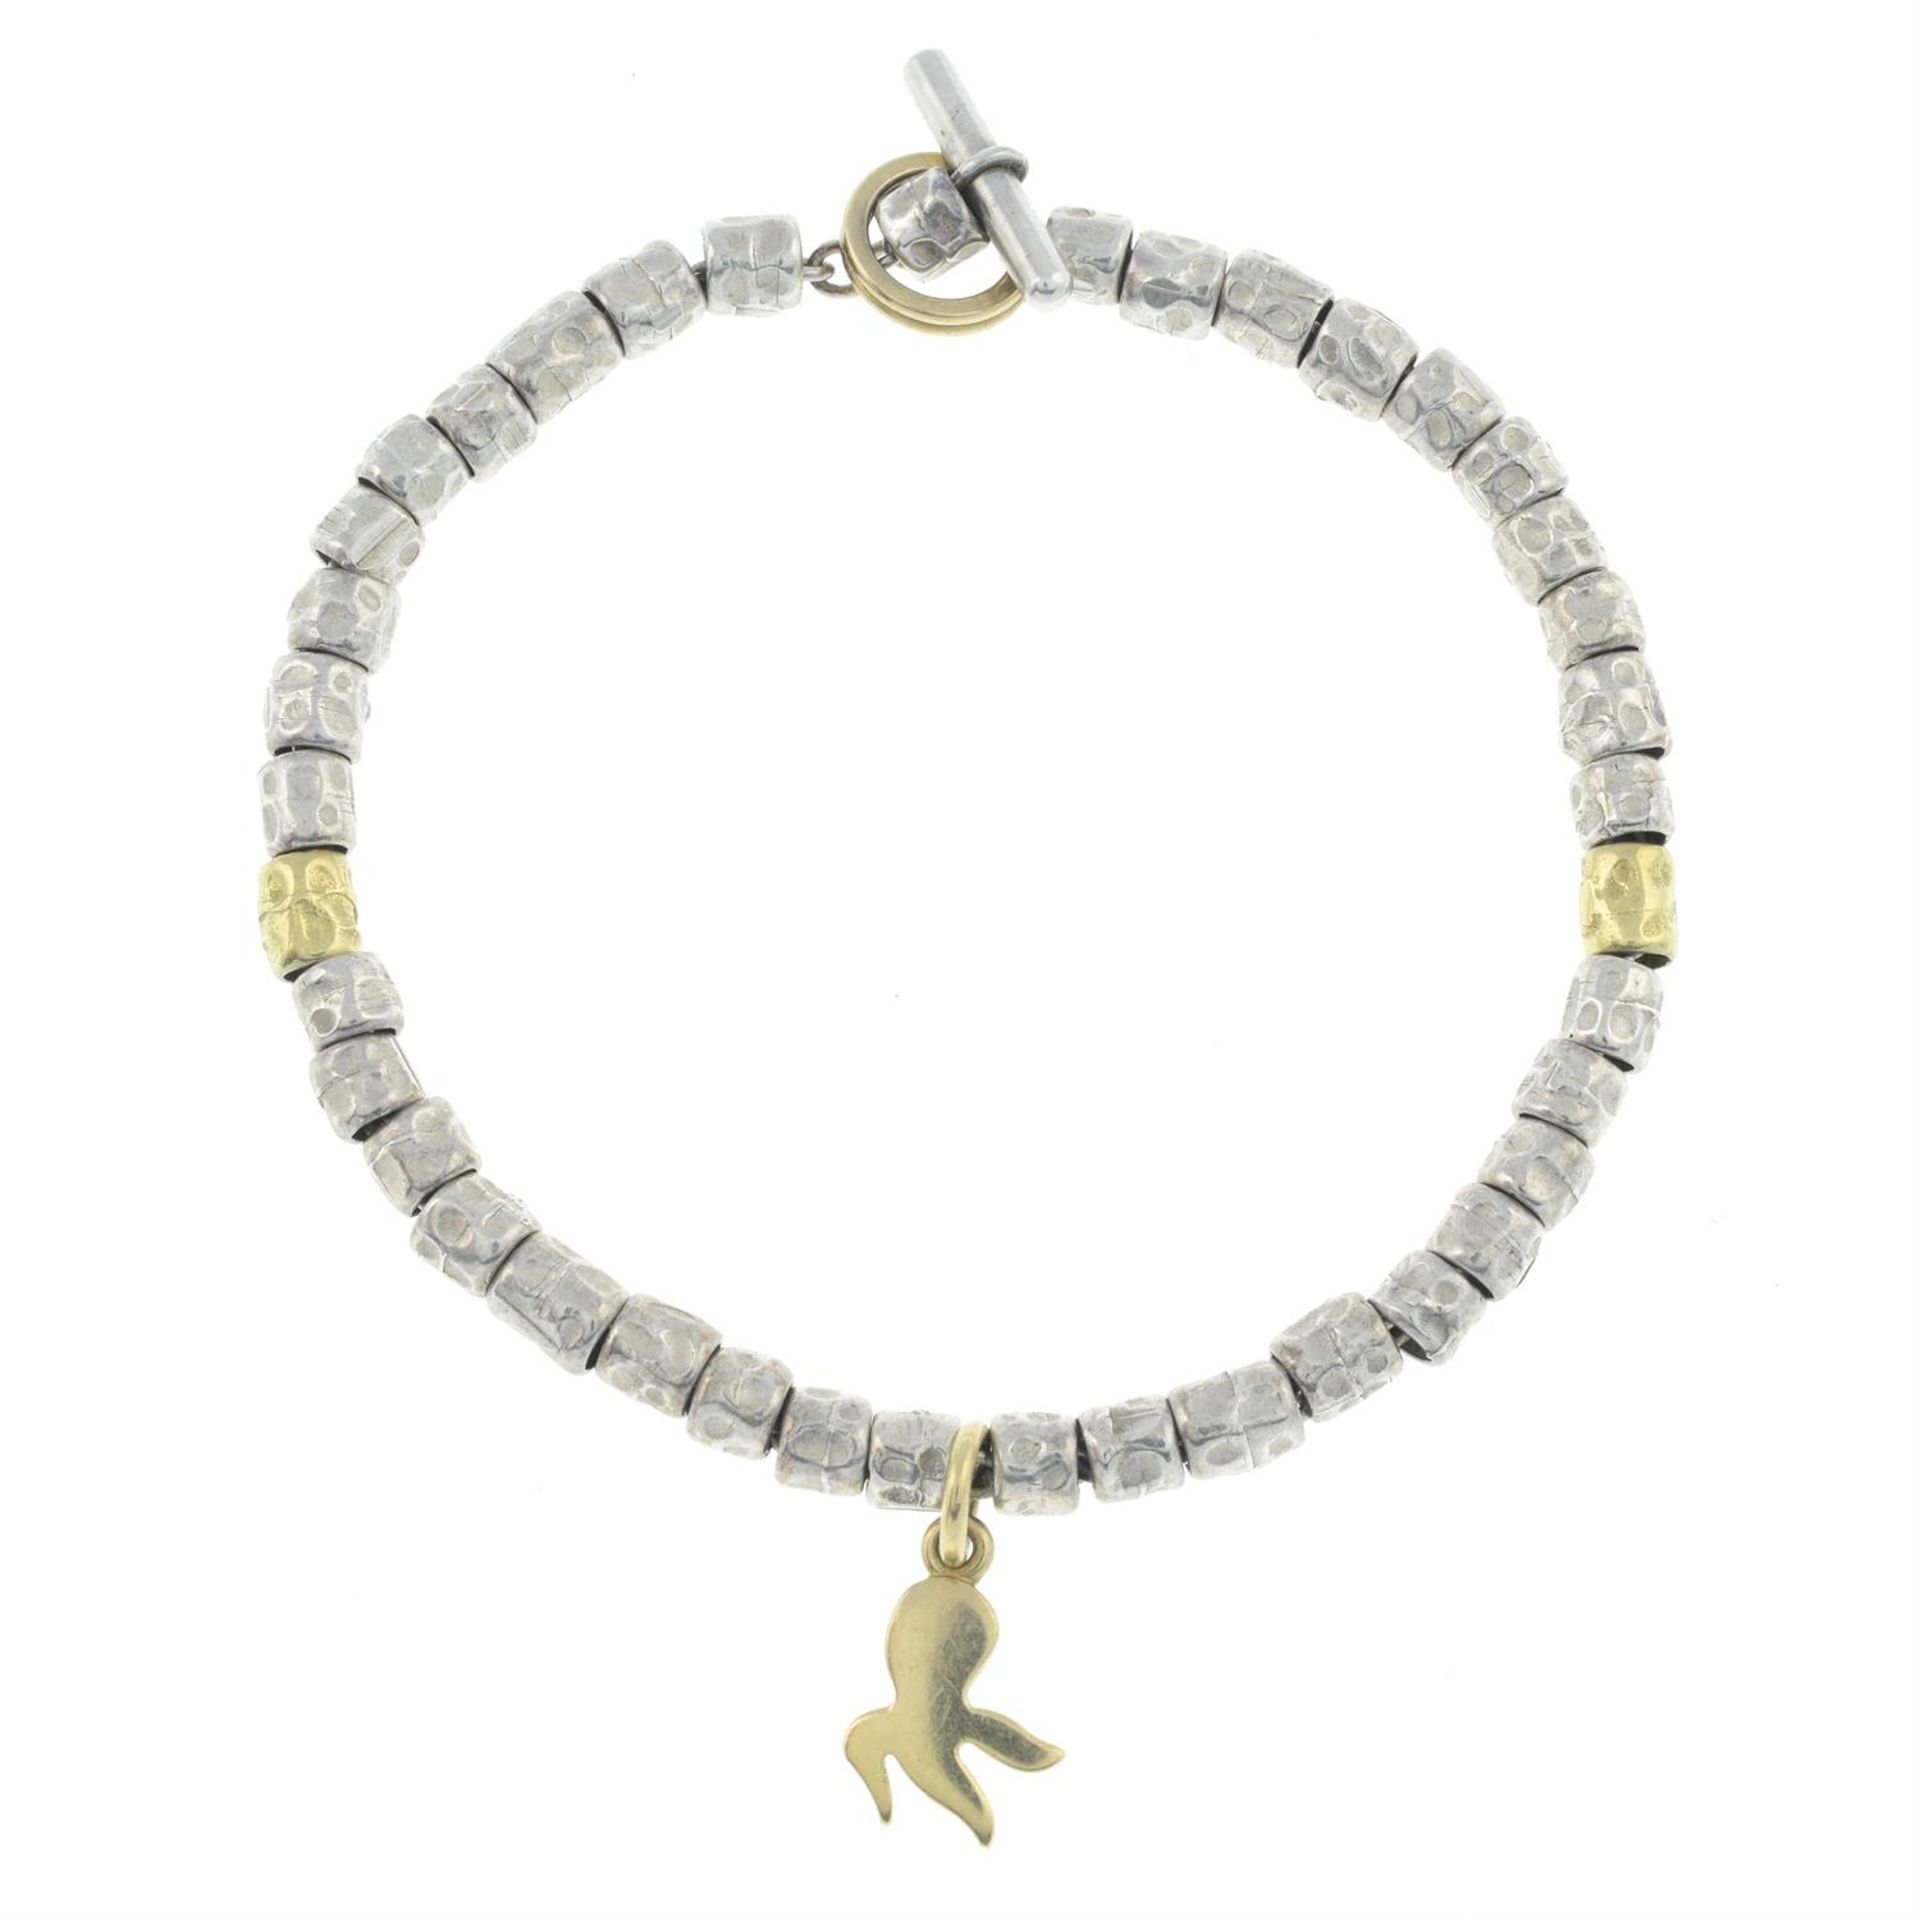 A silver 'Granneli' bracelet, with 18ct gold octopus charm, by Dodo.